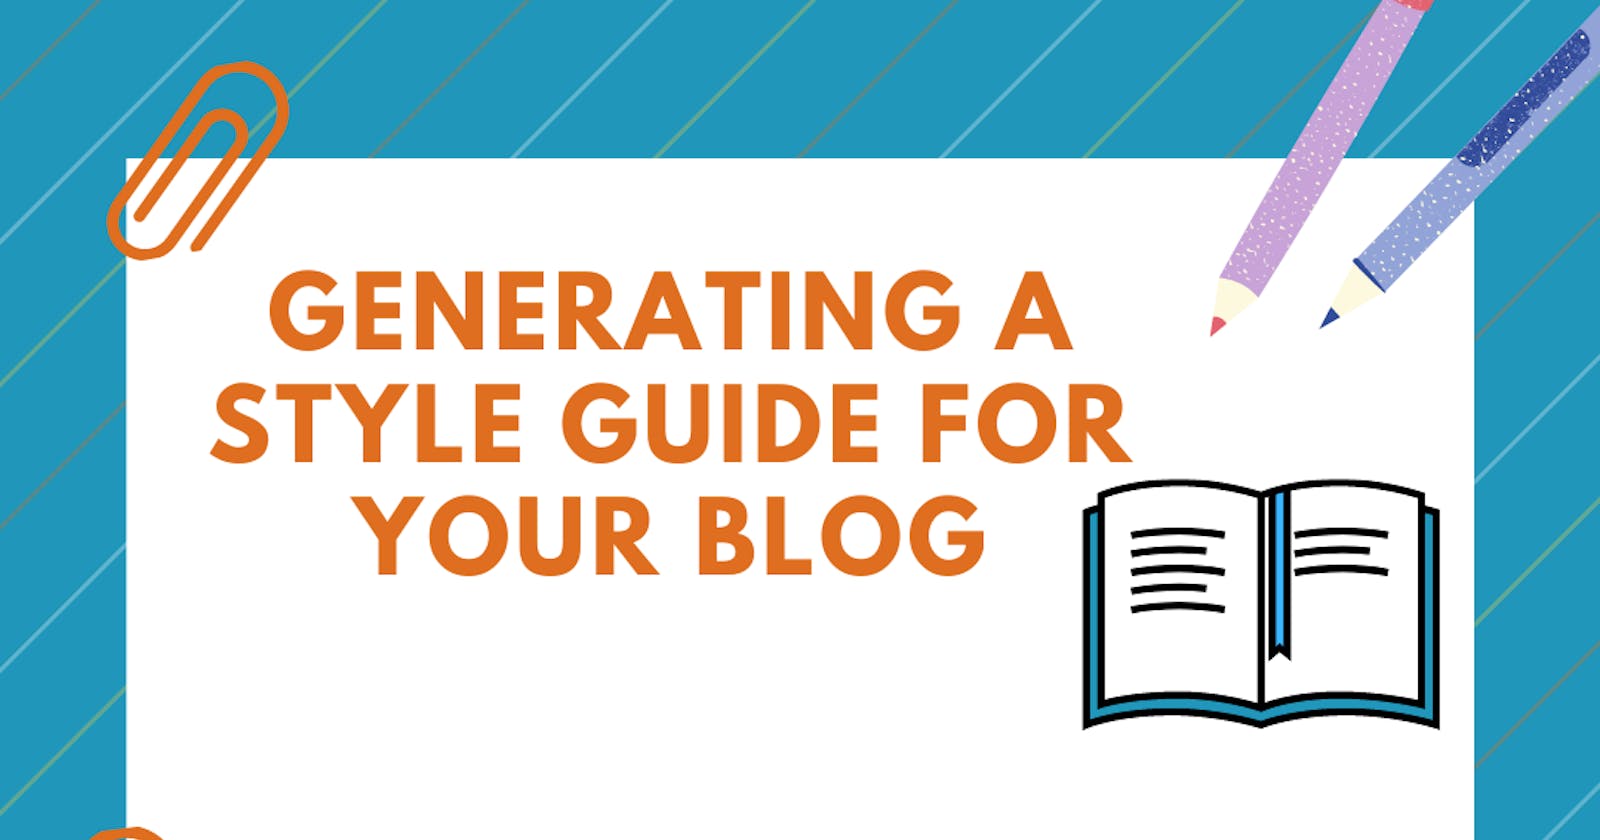 Generating a Style Guide For Your Blog